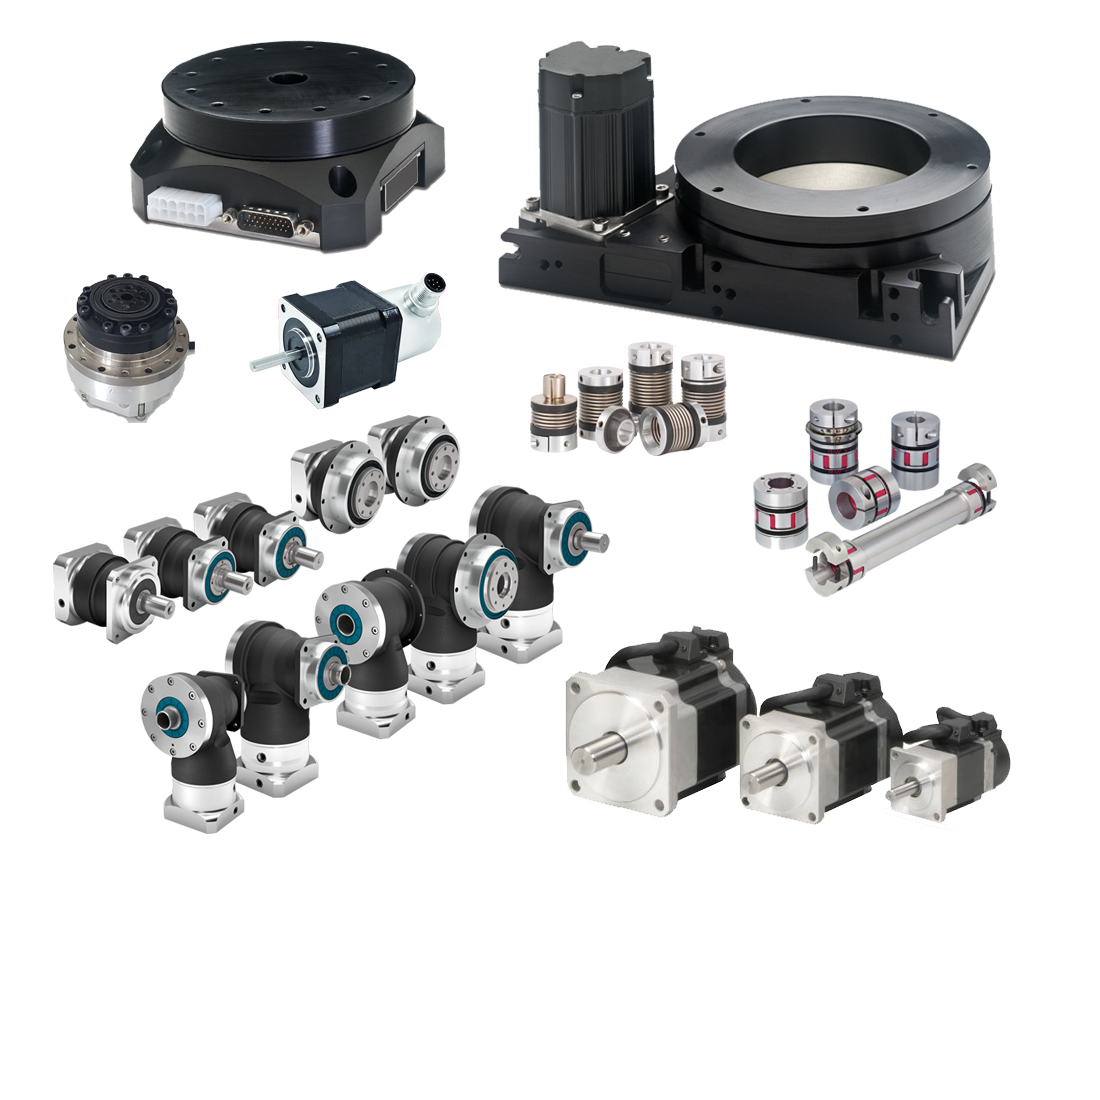 a variety of rotary solutions including motors, rotary tables and gearboxes